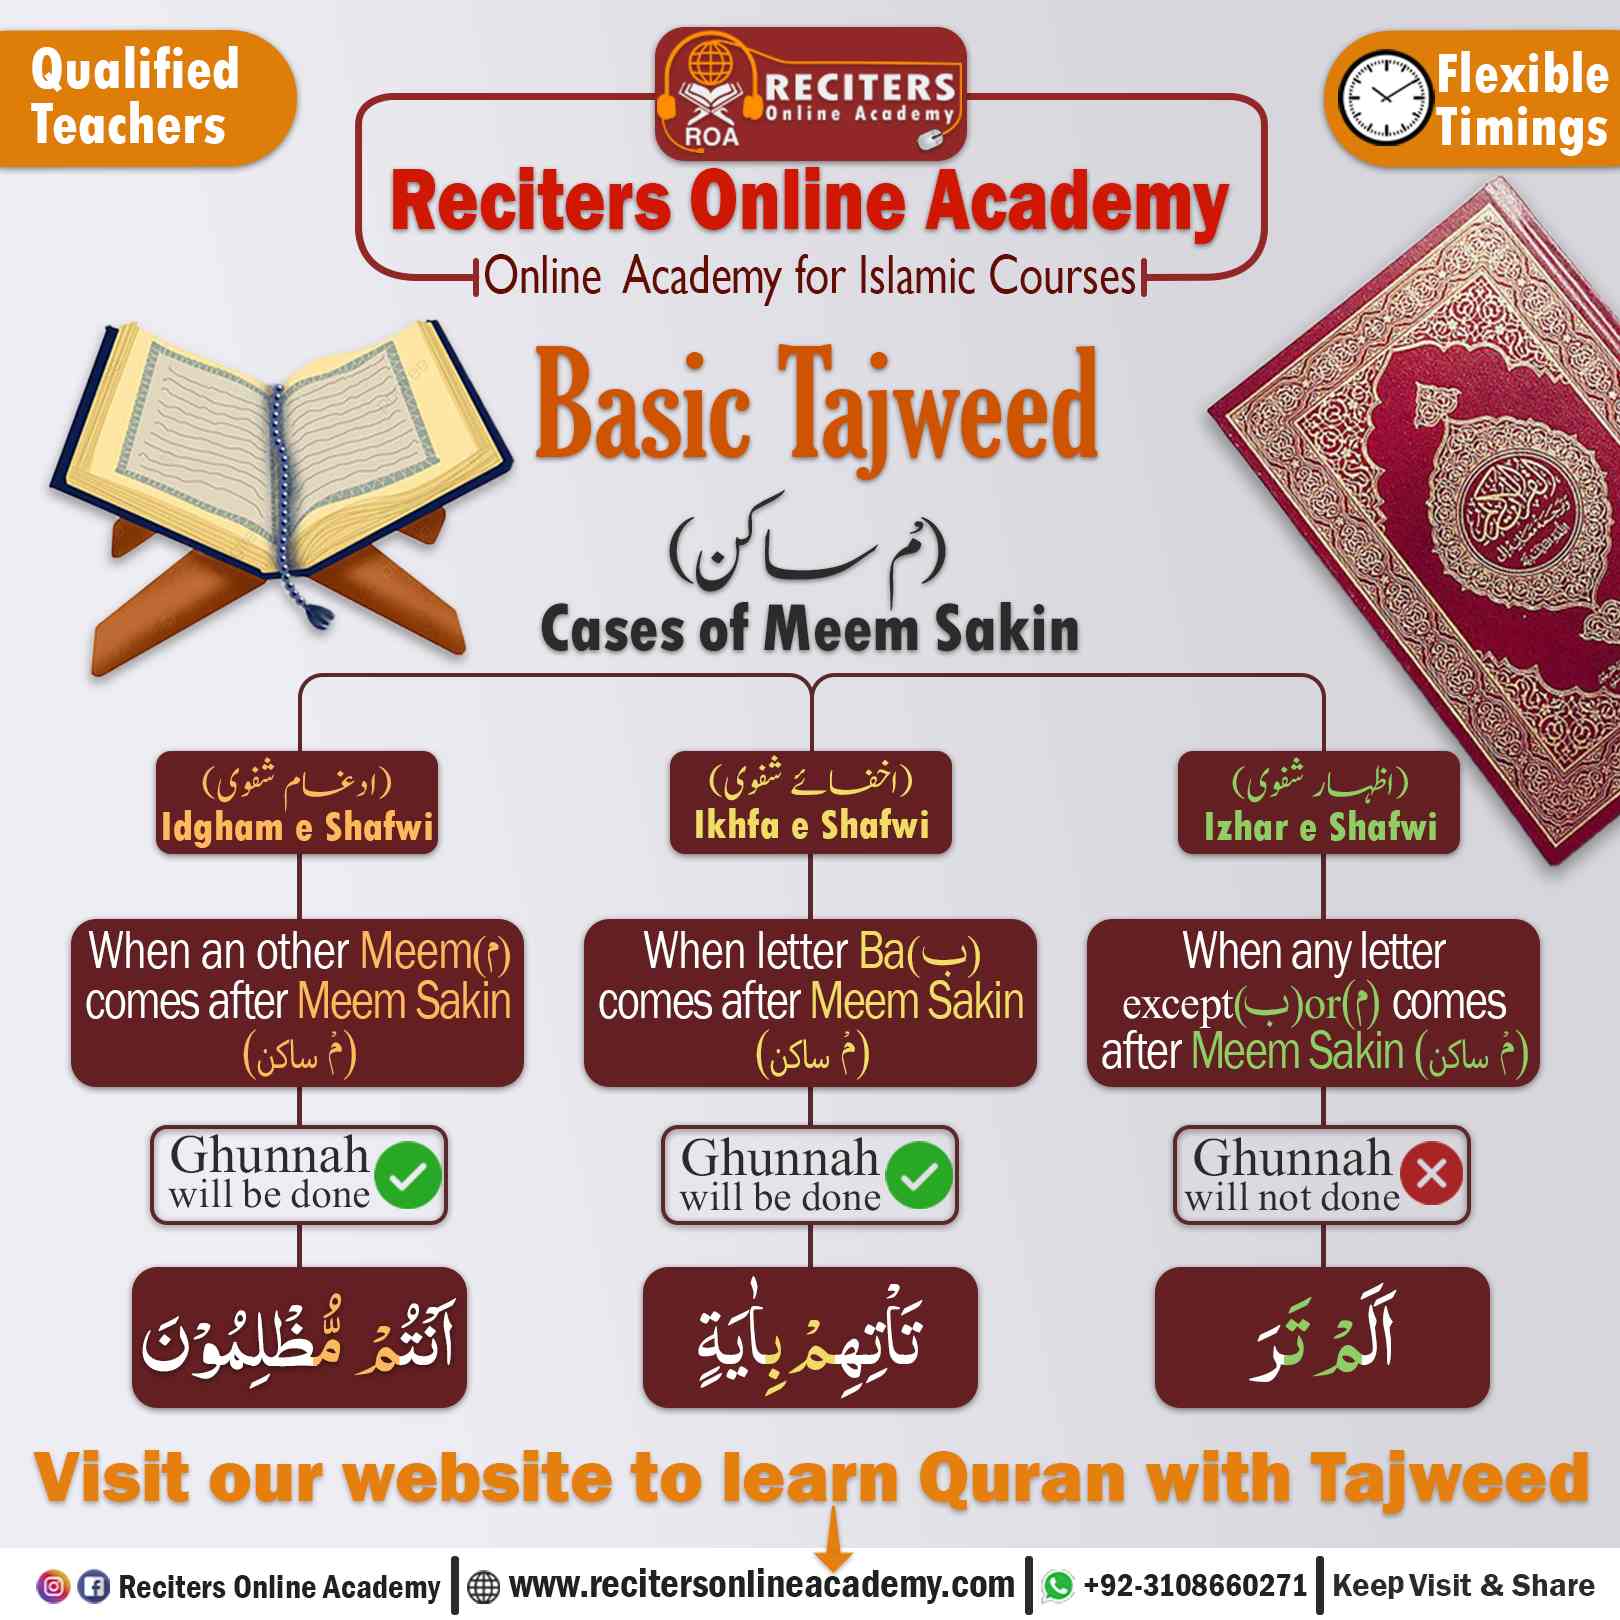 What are the 3 rules of Tajweed?